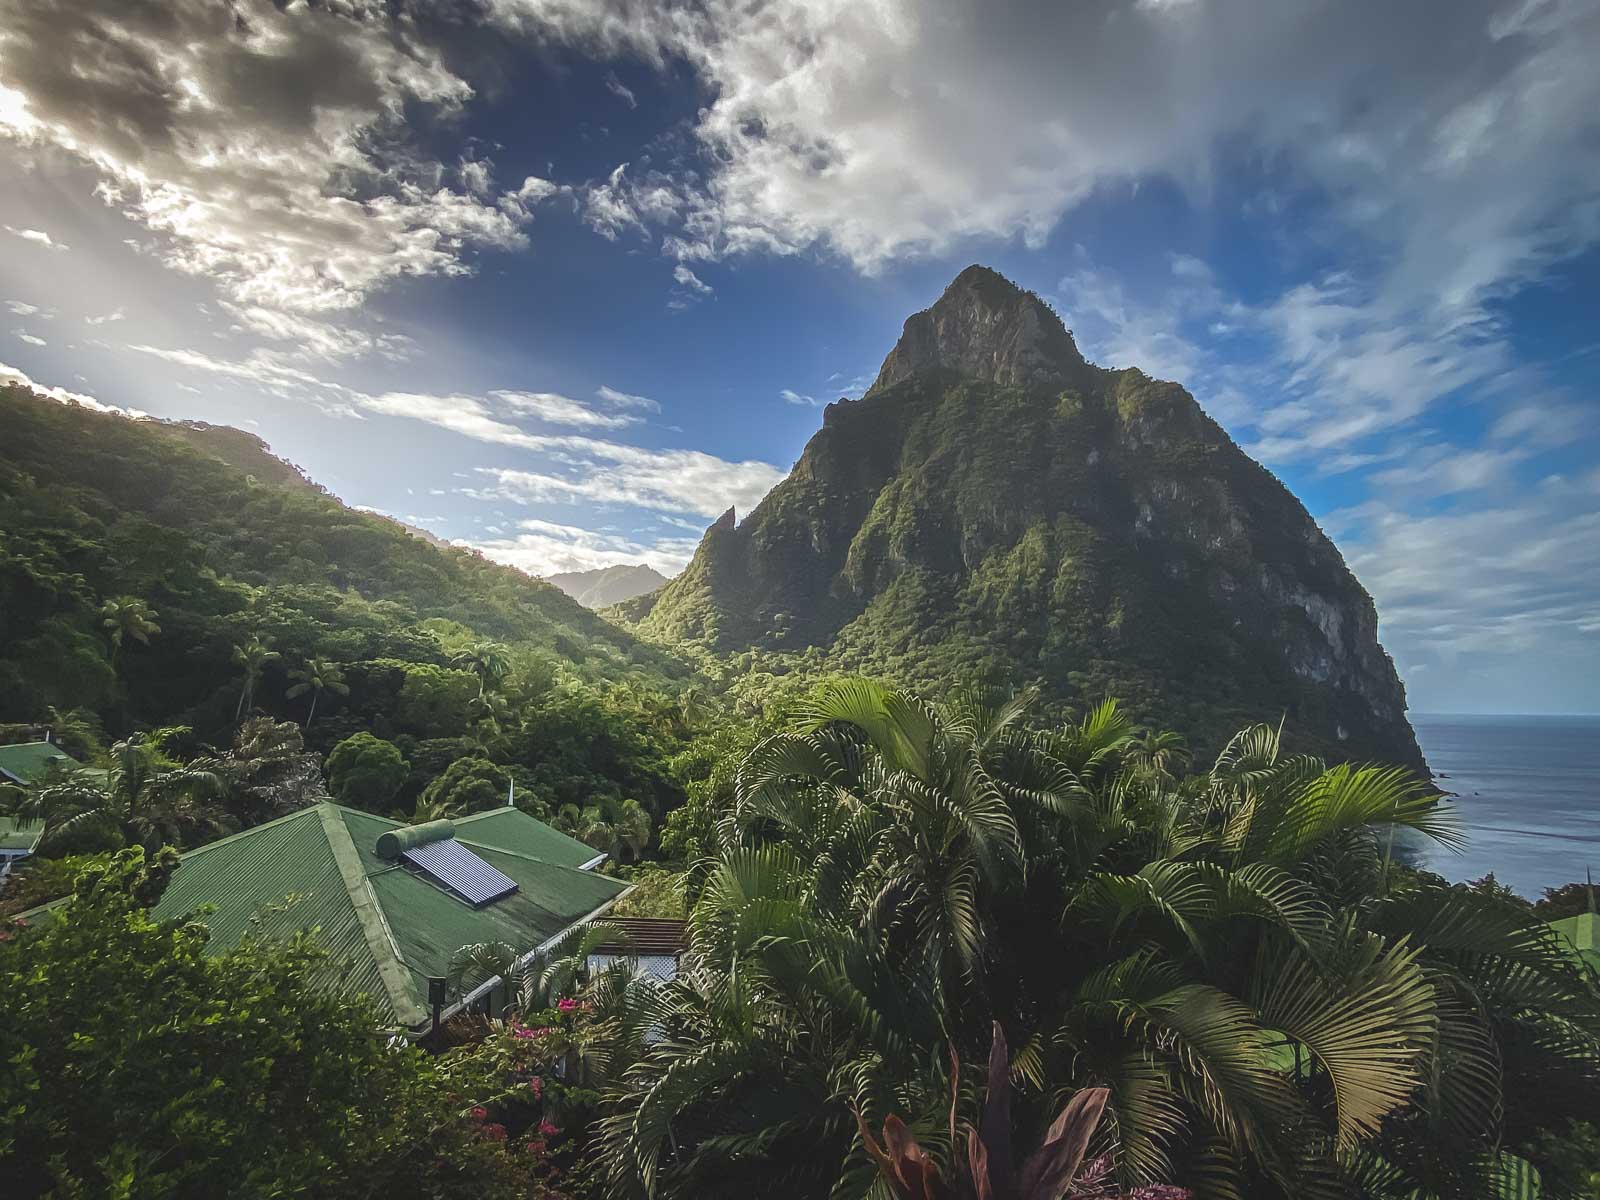 Hiking Gros Piton in St. Lucia